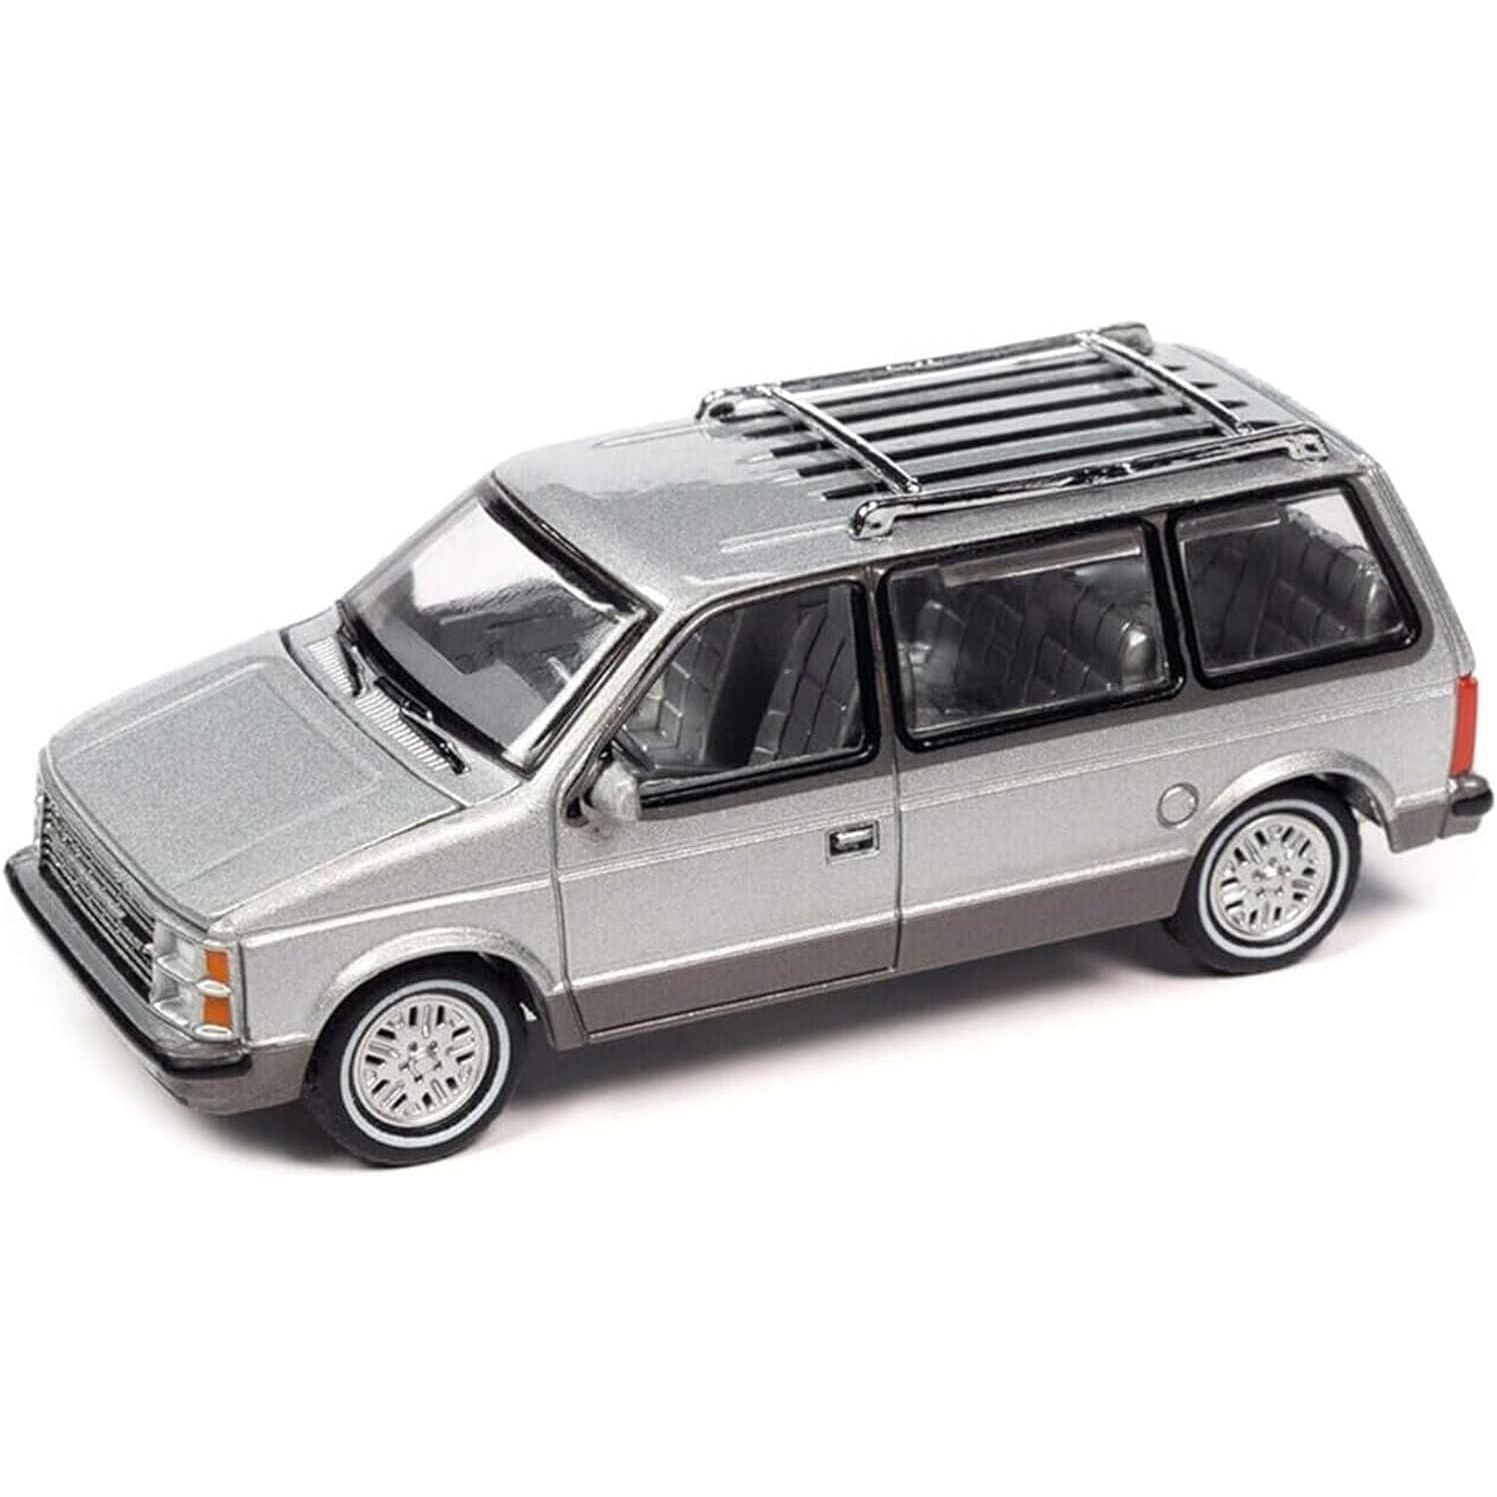 1985 Plymouth Voyager Minivan Radiant Silver Metallic with Roofrack Mighty Minivans Limited Edition 1/64 Diecast Model Car by Auto World 64402-AWSP129A